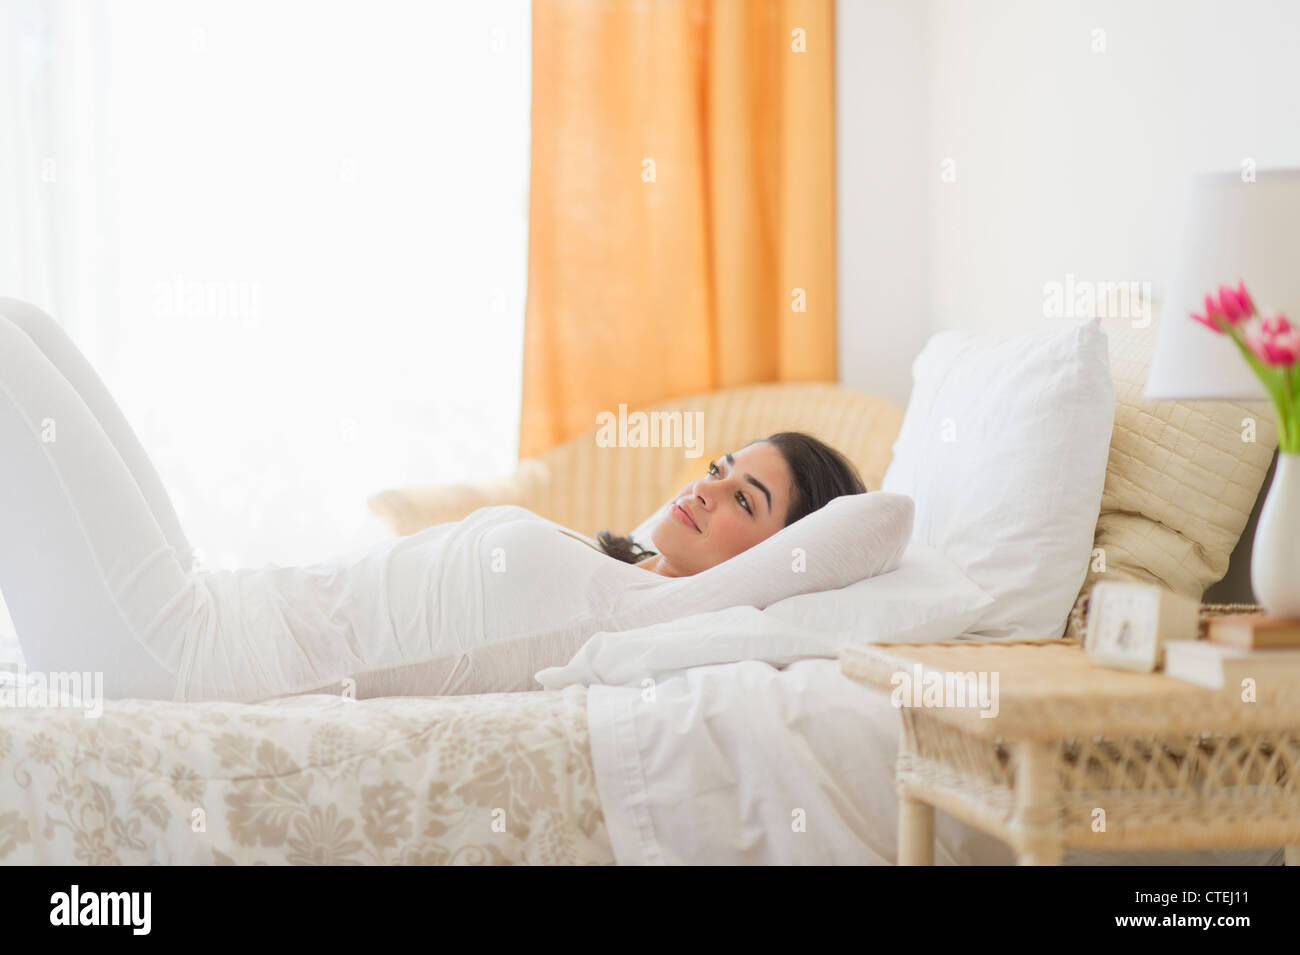 USA, New Jersey, Jersey City, Young woman lying on bed Stock Photo